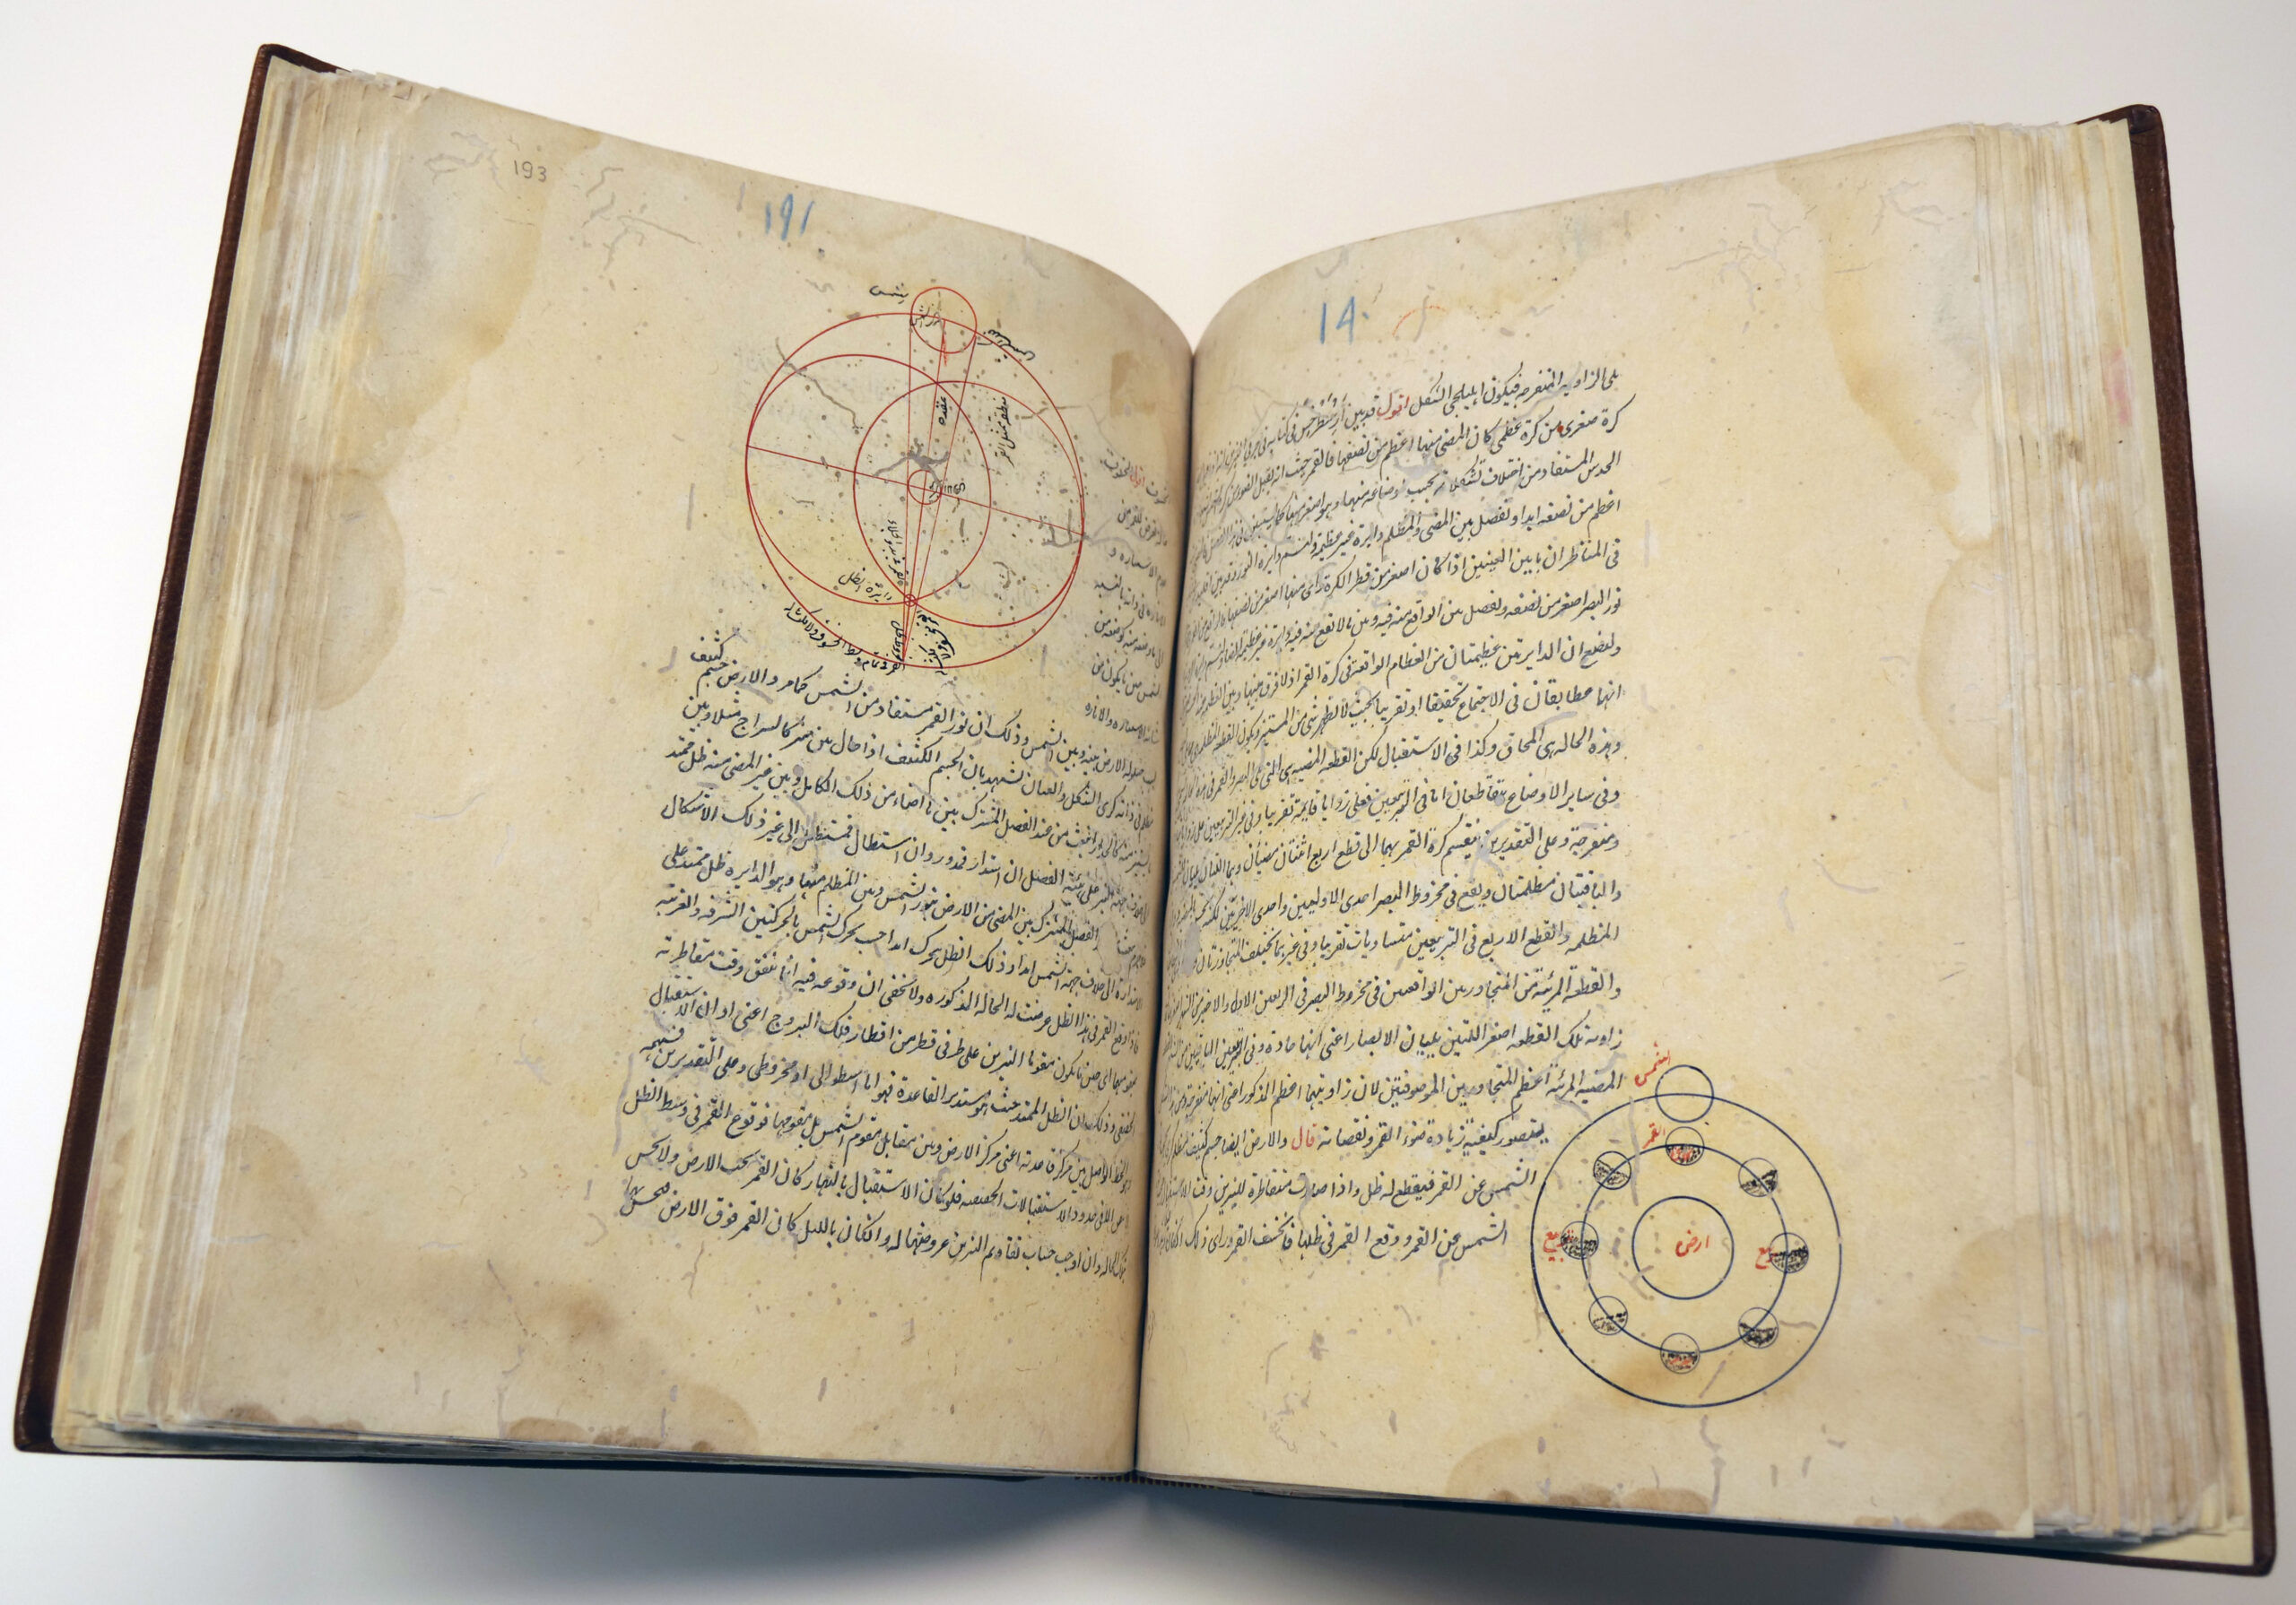 Geometric diagrams of eclipses in a 15th century Islamic manuscript from northern India, by Persian Sunni scholar Nizamaddin ibn Muhamad an-Nisapuri, a mathematician, astronomer, jurist, Quran exegete, and poet based in Tabriz, Azerbaijan. Picture by Carla DeMello.